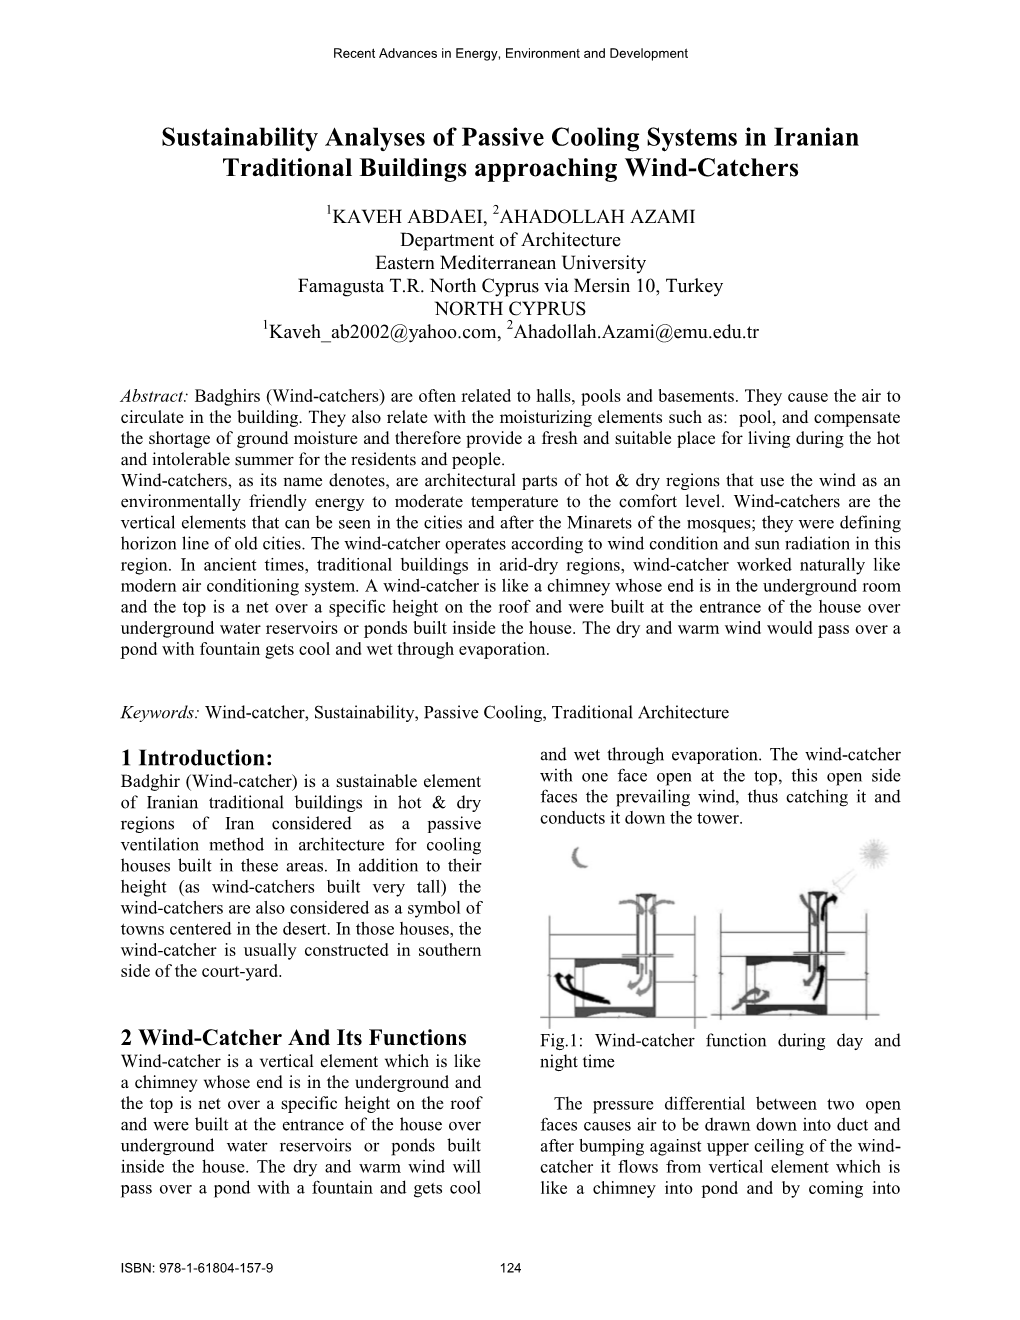 Sustainability Analyses of Passive Cooling Systems in Iranian Traditional Buildings Approaching Wind-Catchers